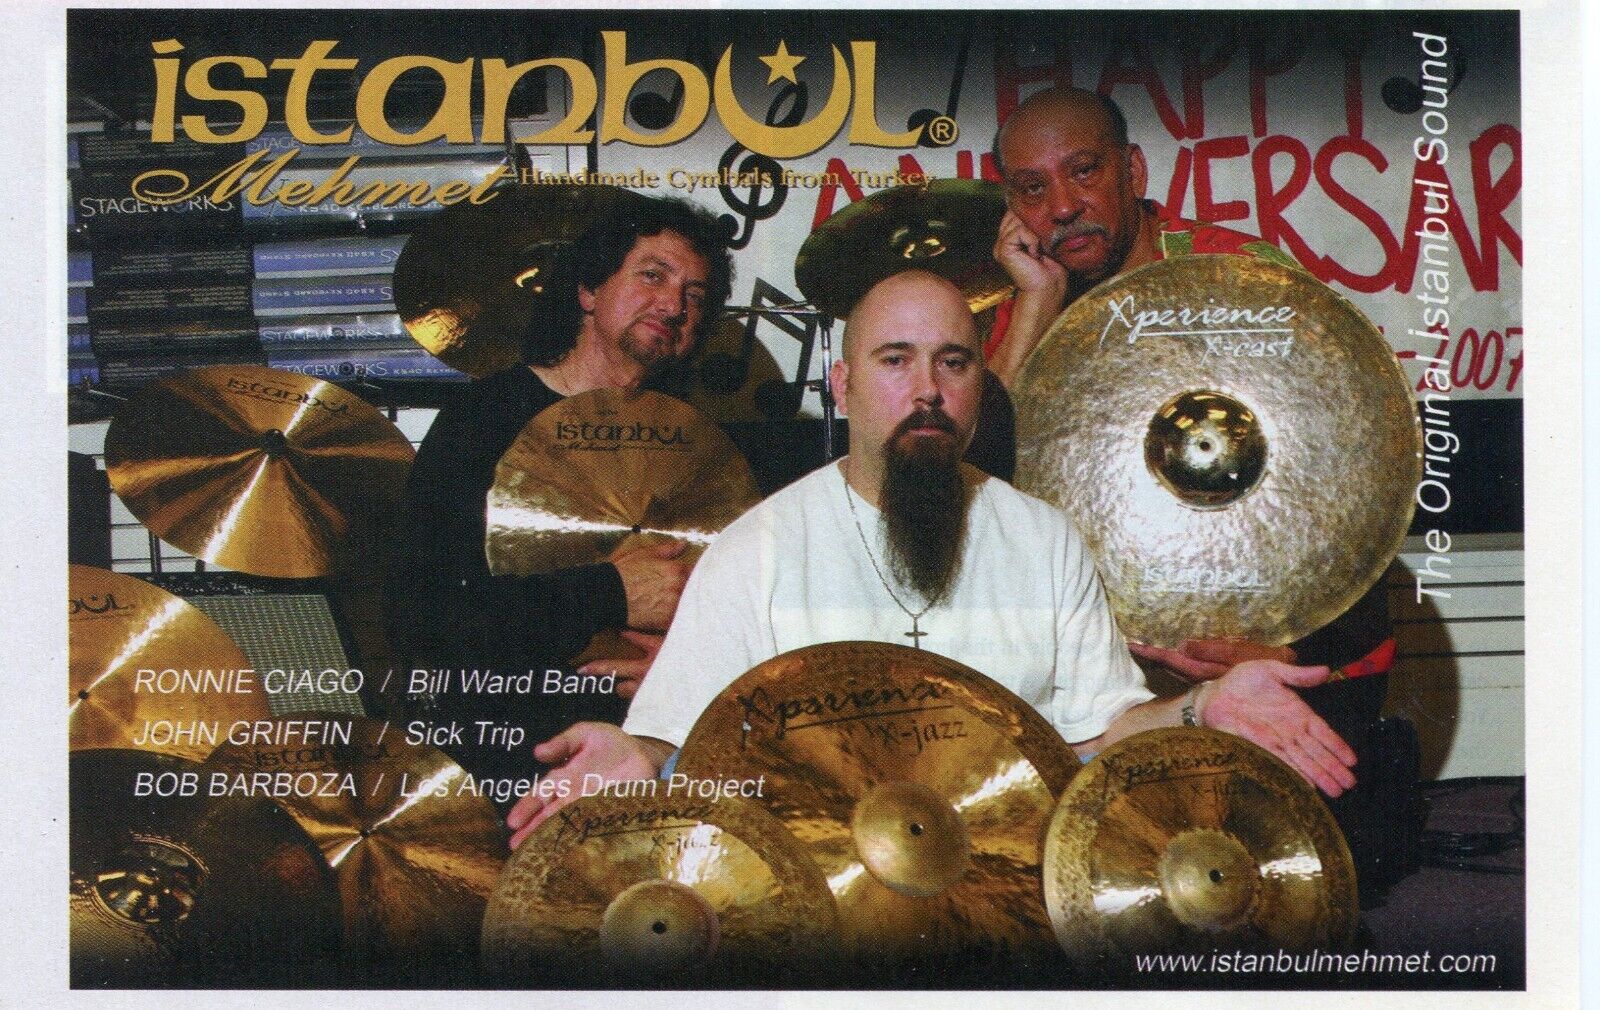 2008 small Print Ad of Istanbul Mehmet Drum Cymbals w Ronnie Ciago, John Griffin